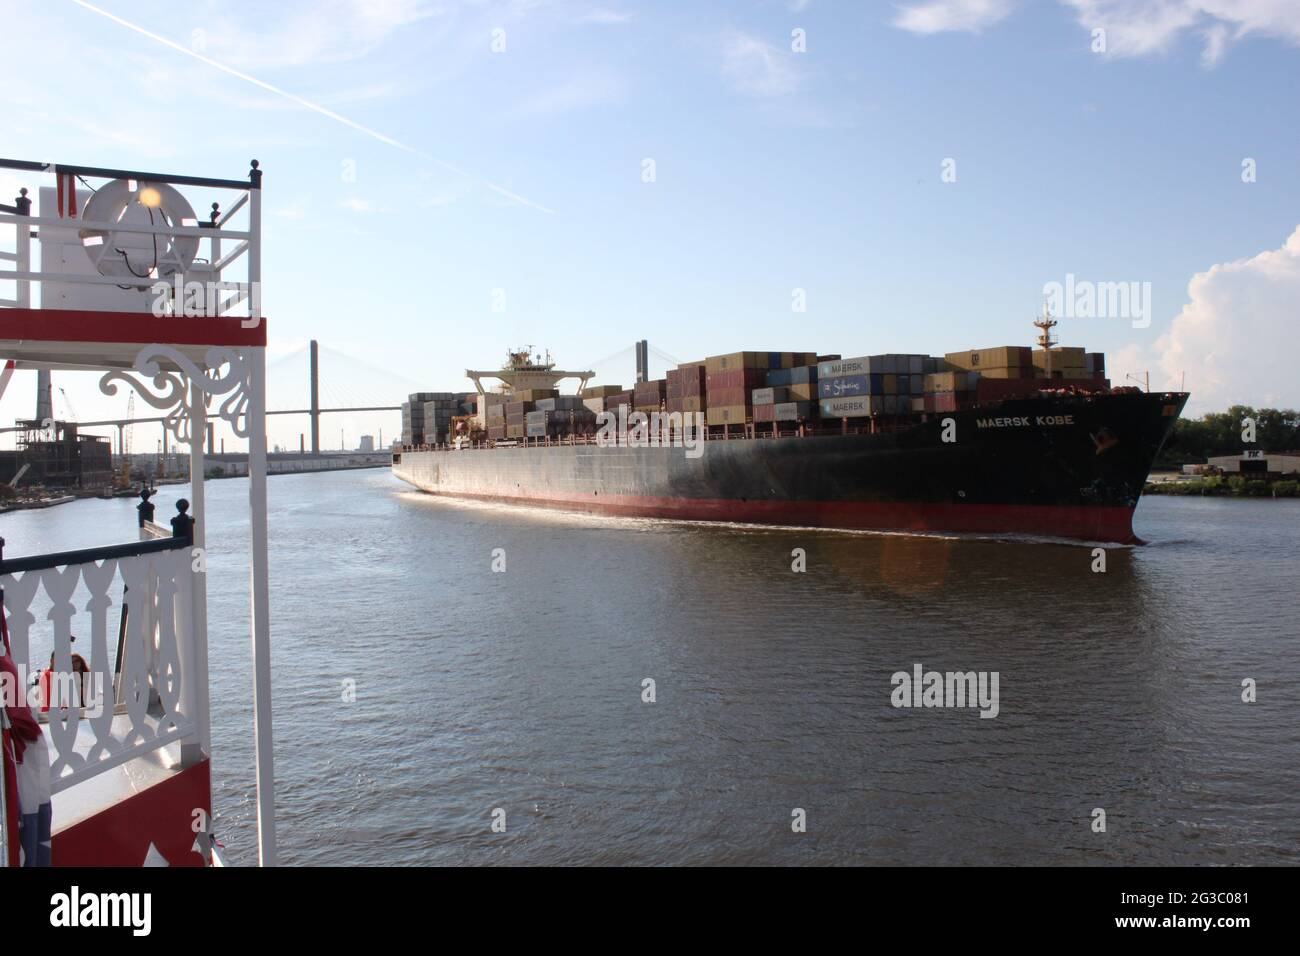 Massive Container ship passing a tourist Paddle steamer on the Savannah river Georgia USA in the late afternoon. Stock Photo